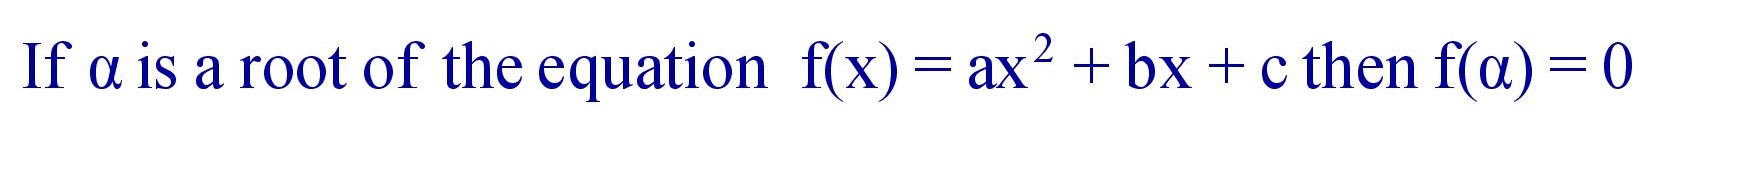 Roots of an Equation